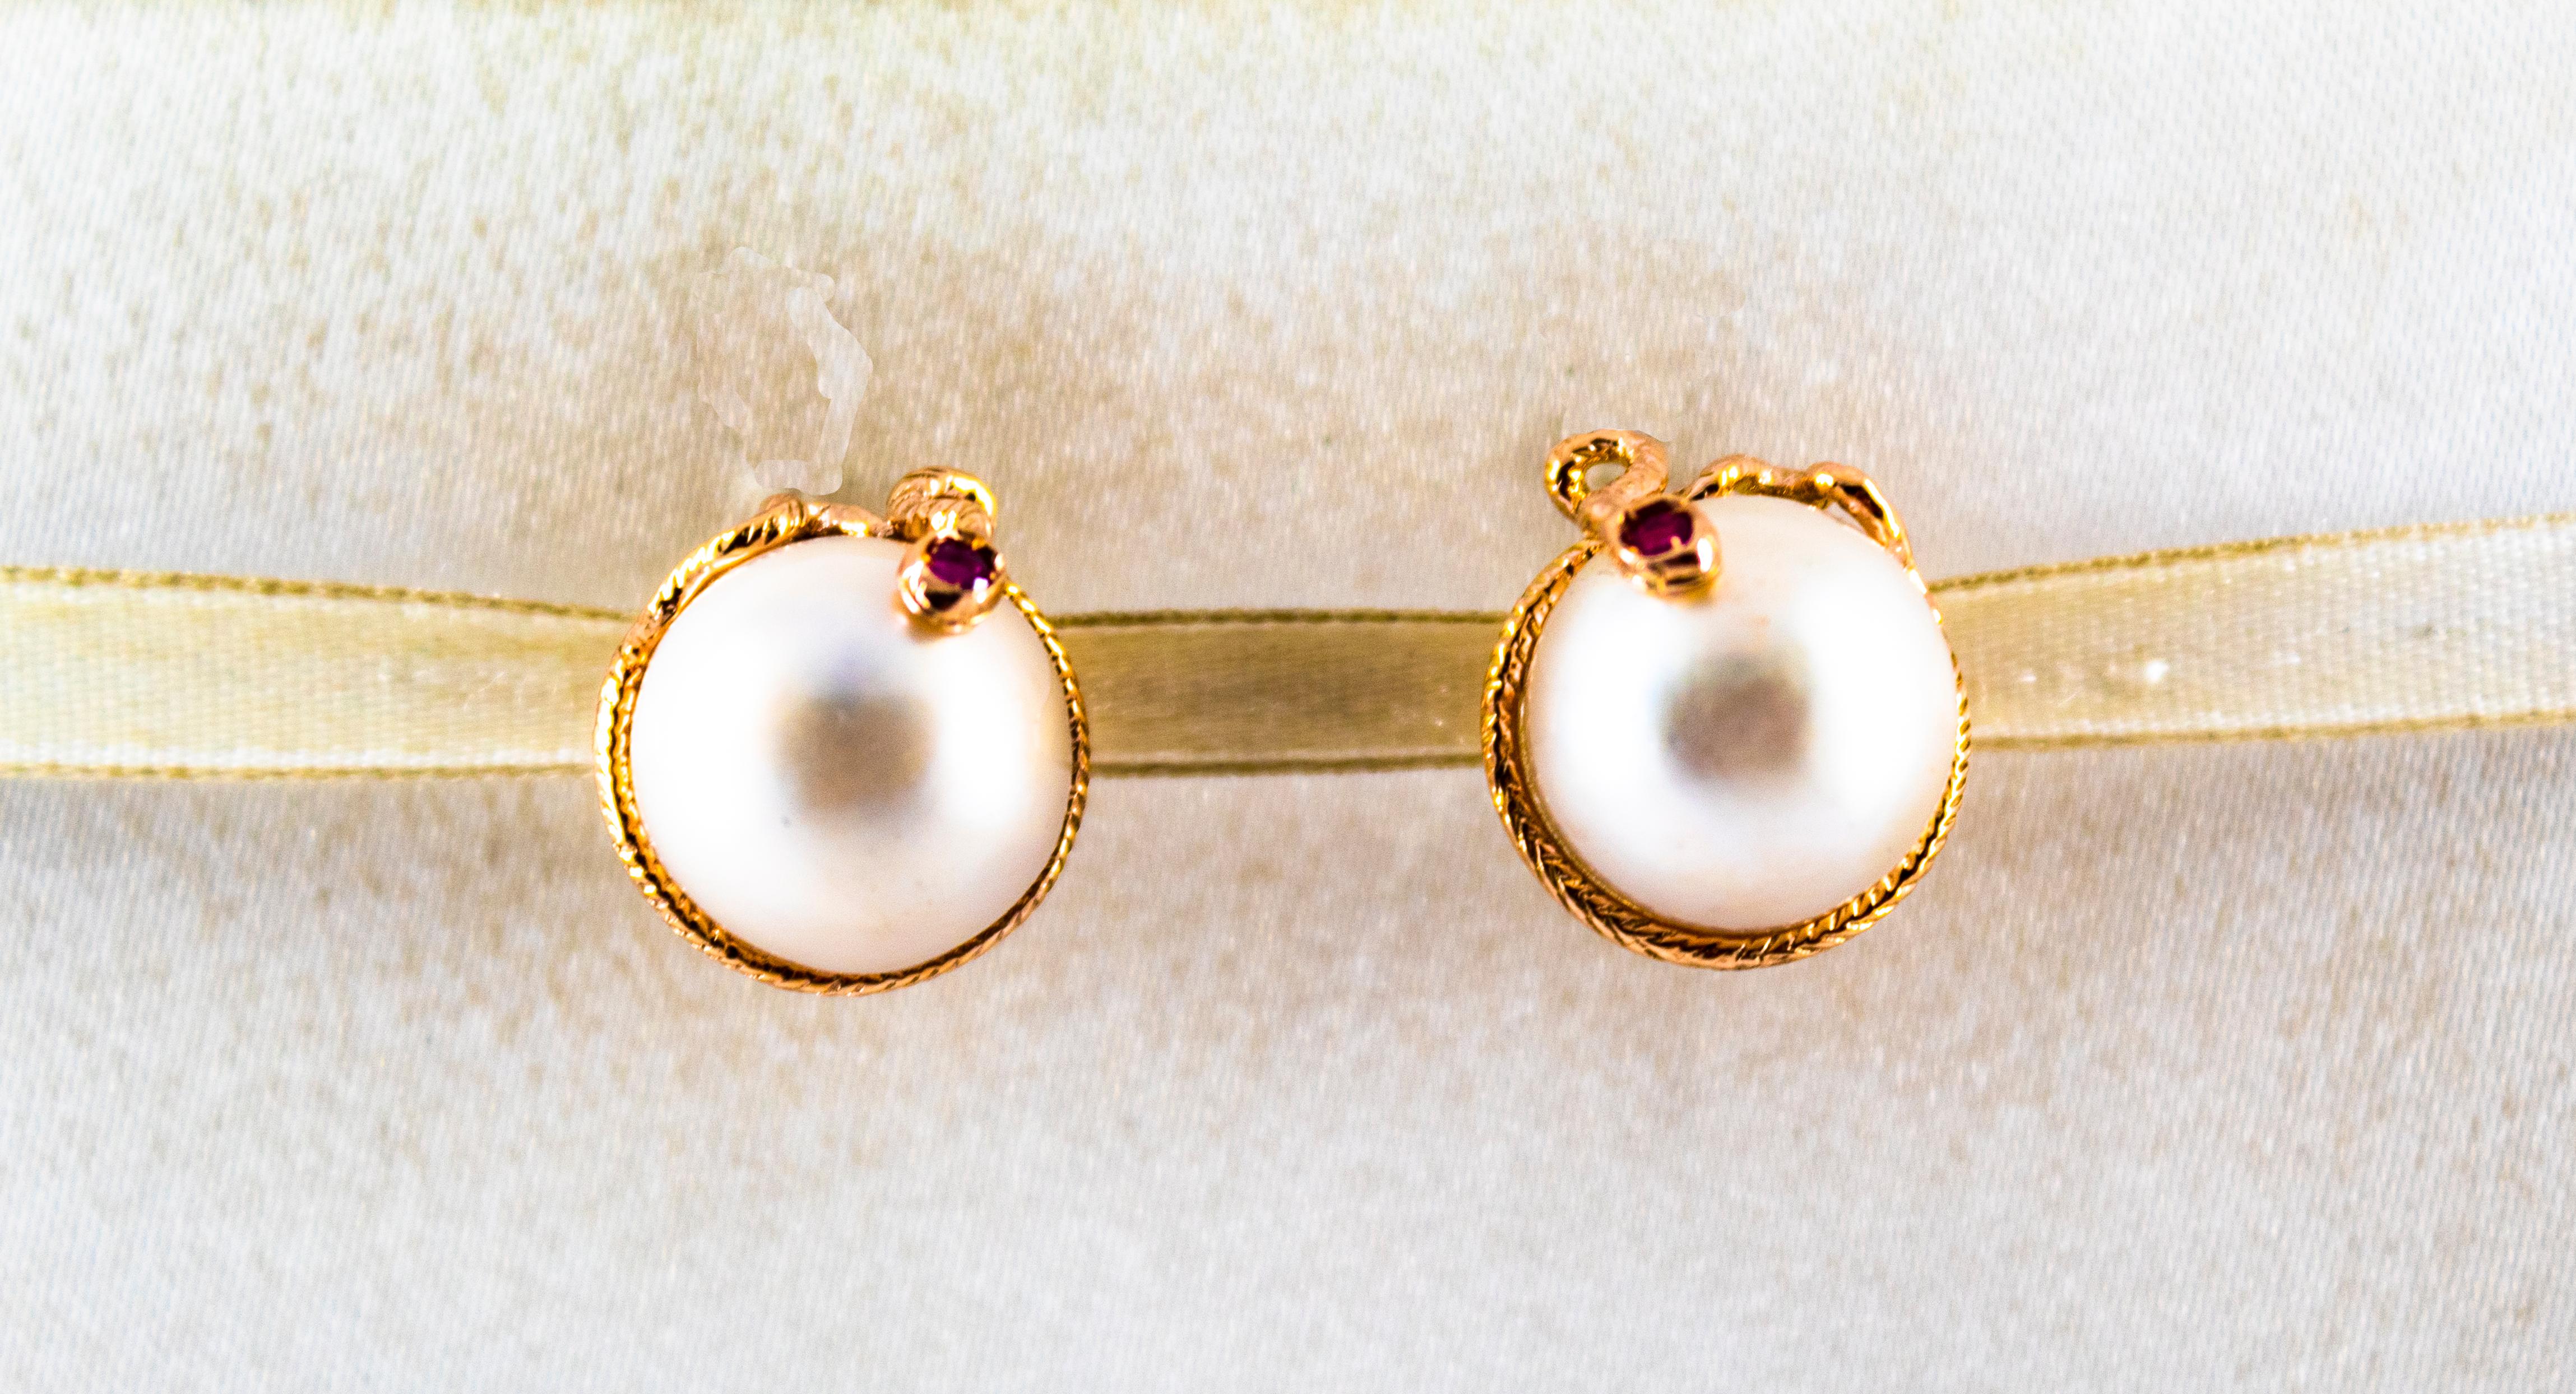 These Earrings are made of 9K Yellow Gold.
These Earrings have 0.12 Carats of Rubies.
These Earrings have two Mabe Pearls.
These Earrings are inspired by Art Nouveau.
These Earrings are available also in a smaller version or with Stud.
All our